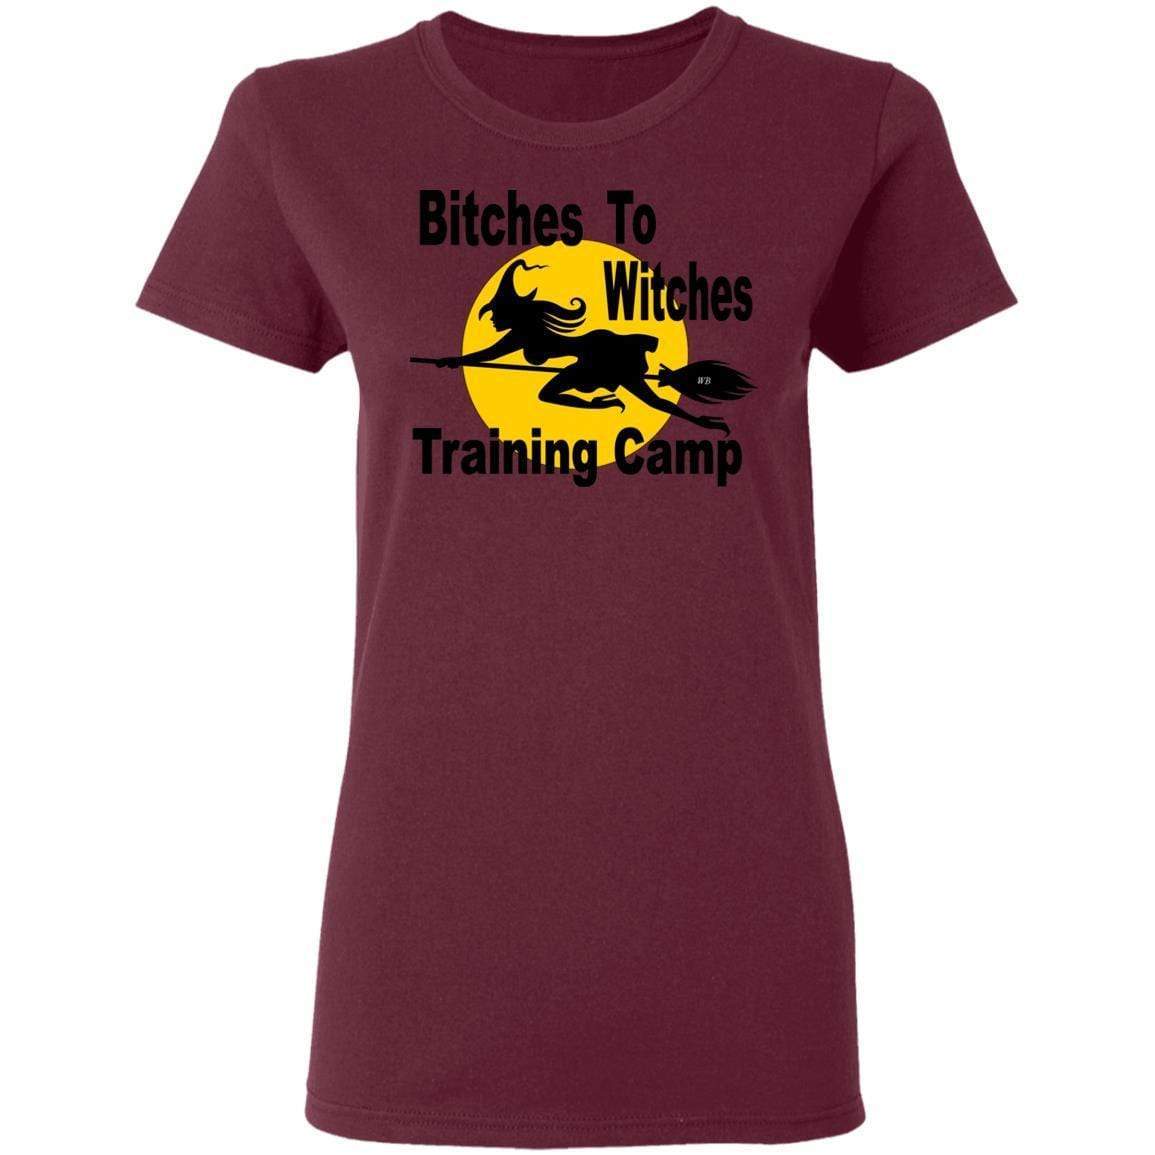 T-Shirts Maroon / S WineyBitches.Co "Bitches To Witches Training Camp" Halloween Ladies' 5.3 oz. T-Shirt WineyBitchesCo